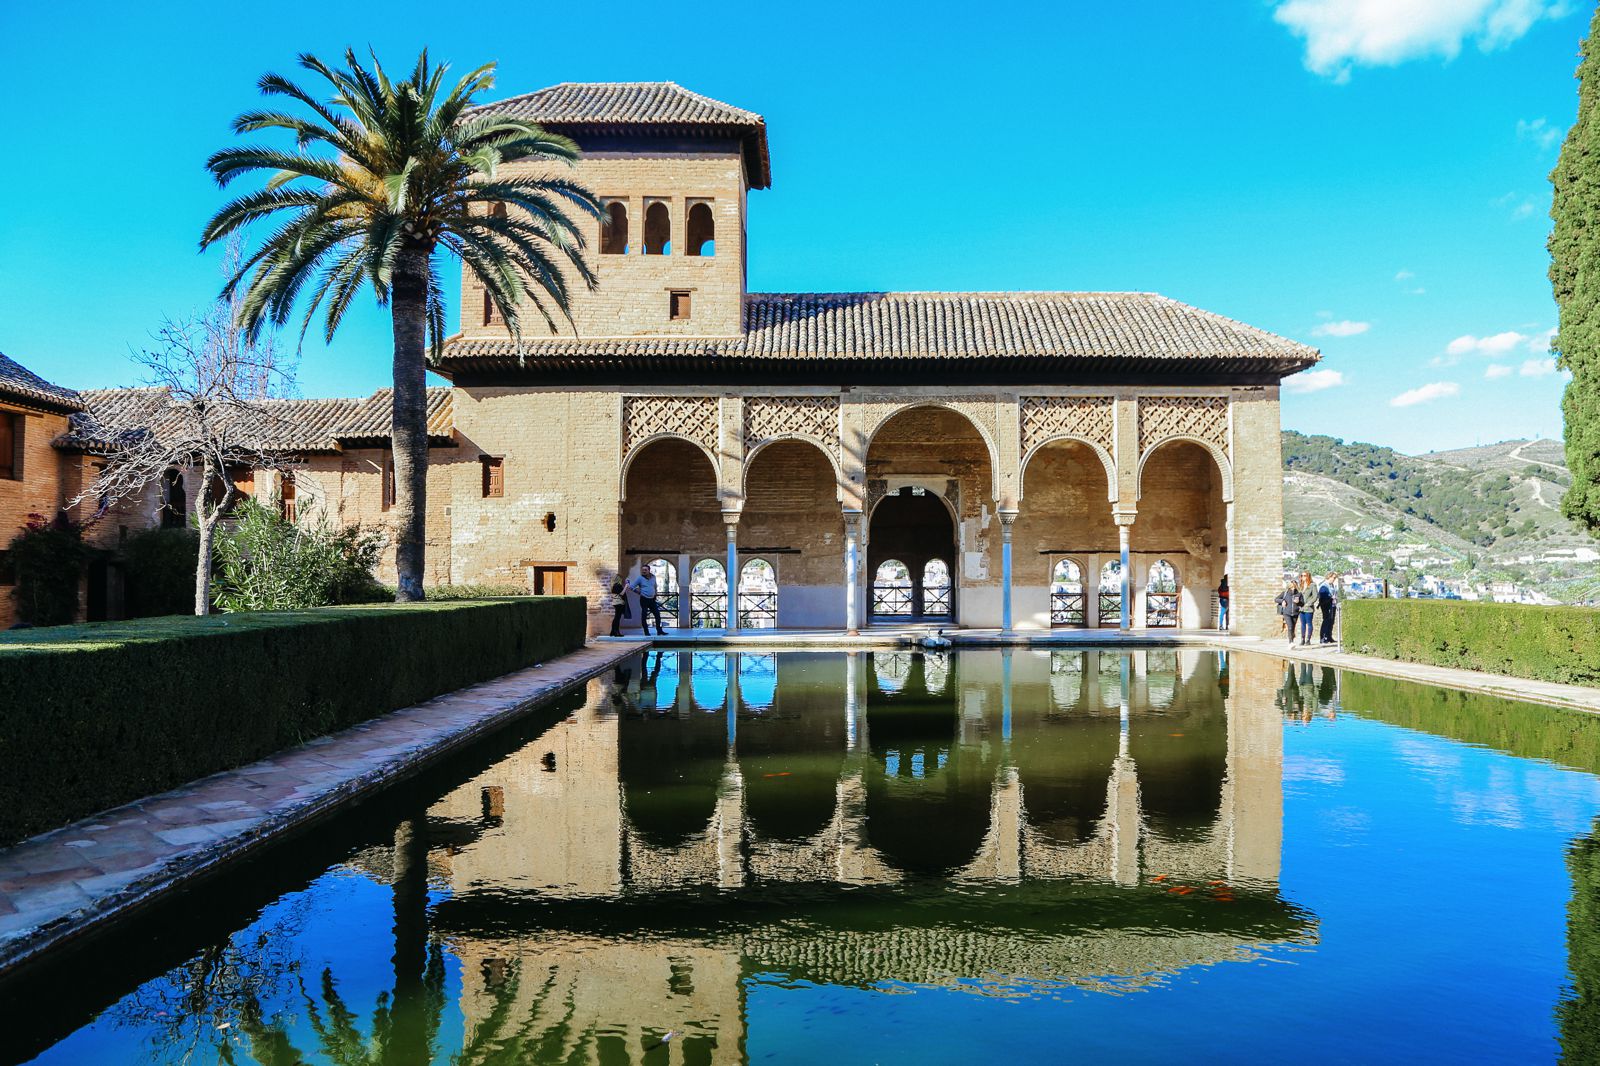 Postcards From Spain - Malaga, Ronda And The Alhambra (20)